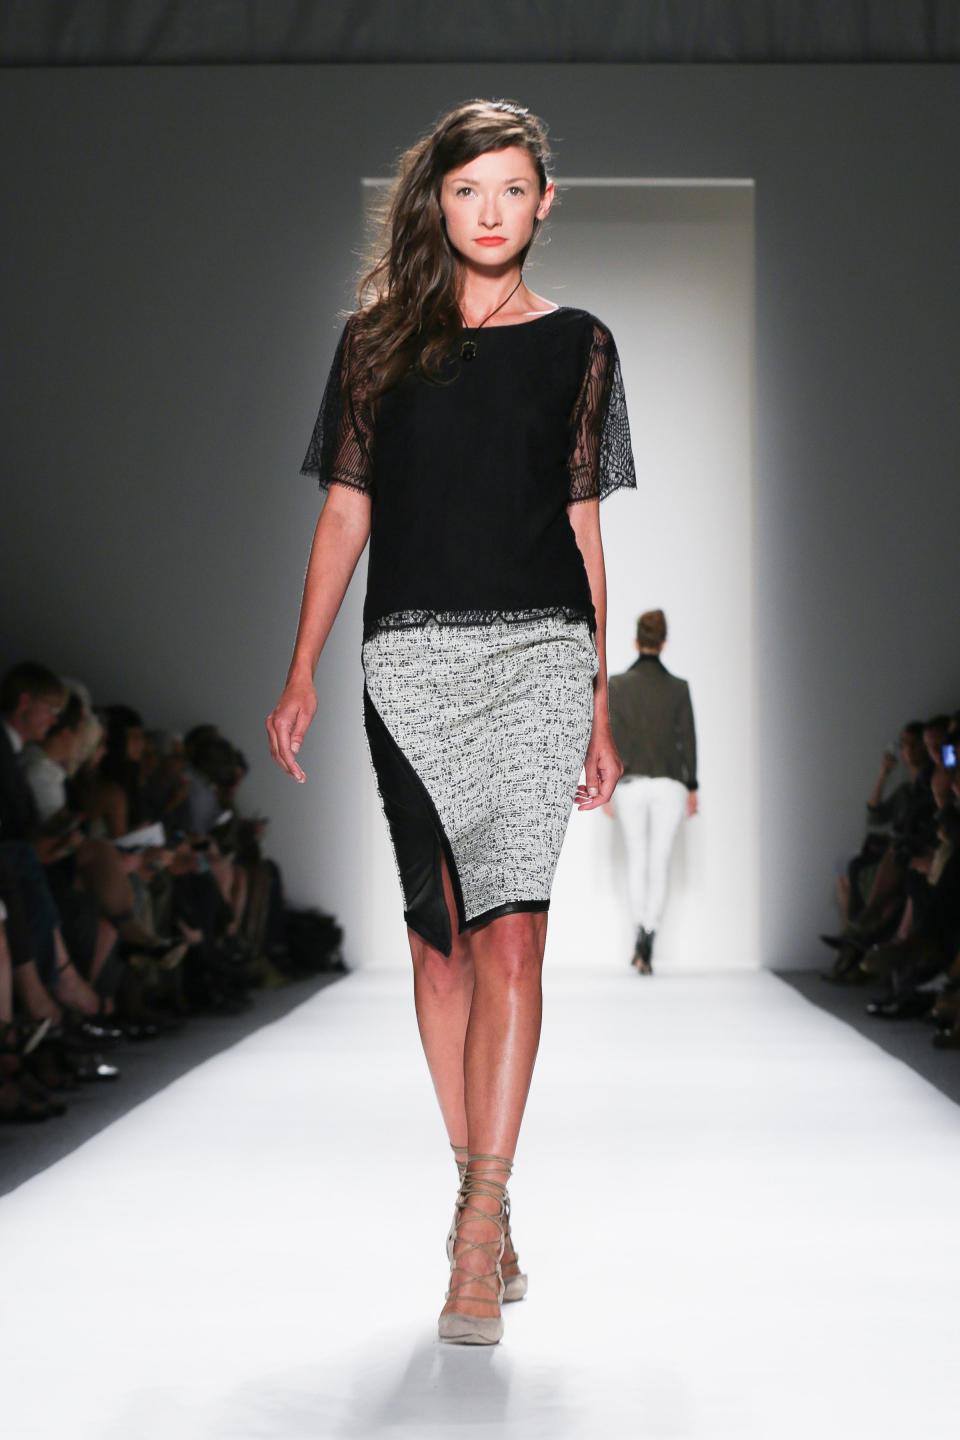 In this Thursday, Sept. 5, 2013, photo, fashion from the Marissa Webb Spring 2014 collection is modeled during Fashion Week in New York. (AP Photo/Marissa Webb)